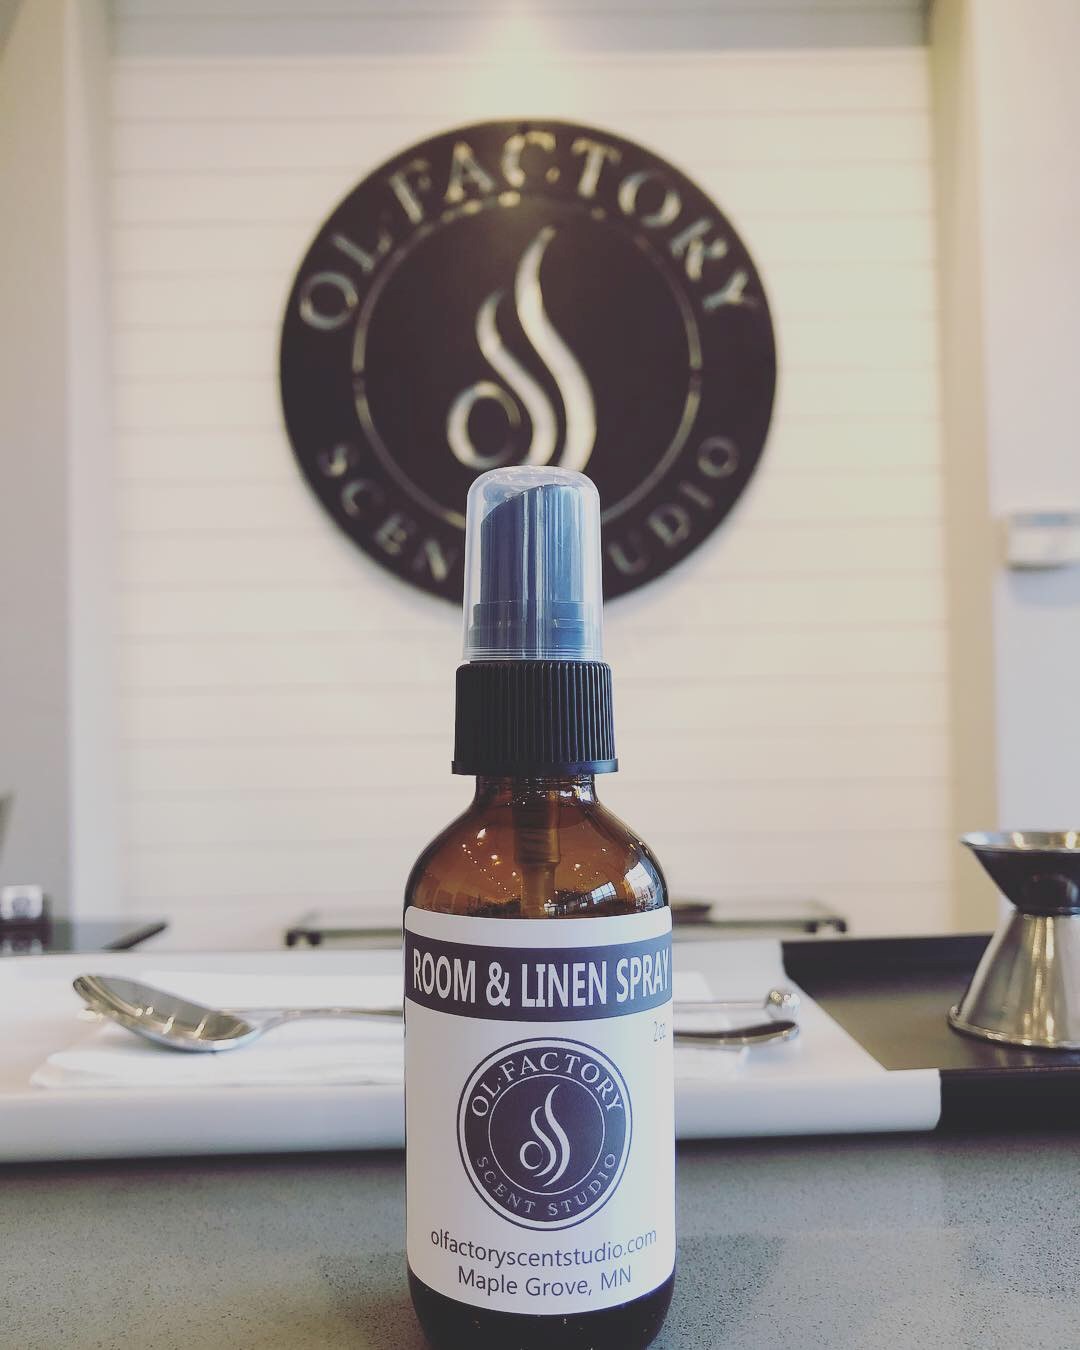 Olfactory Scent Studio also offers custom fragrance oils that are used in oil burners and warmers. Olfactory Scent Studio Maple Grove (763)350-6953